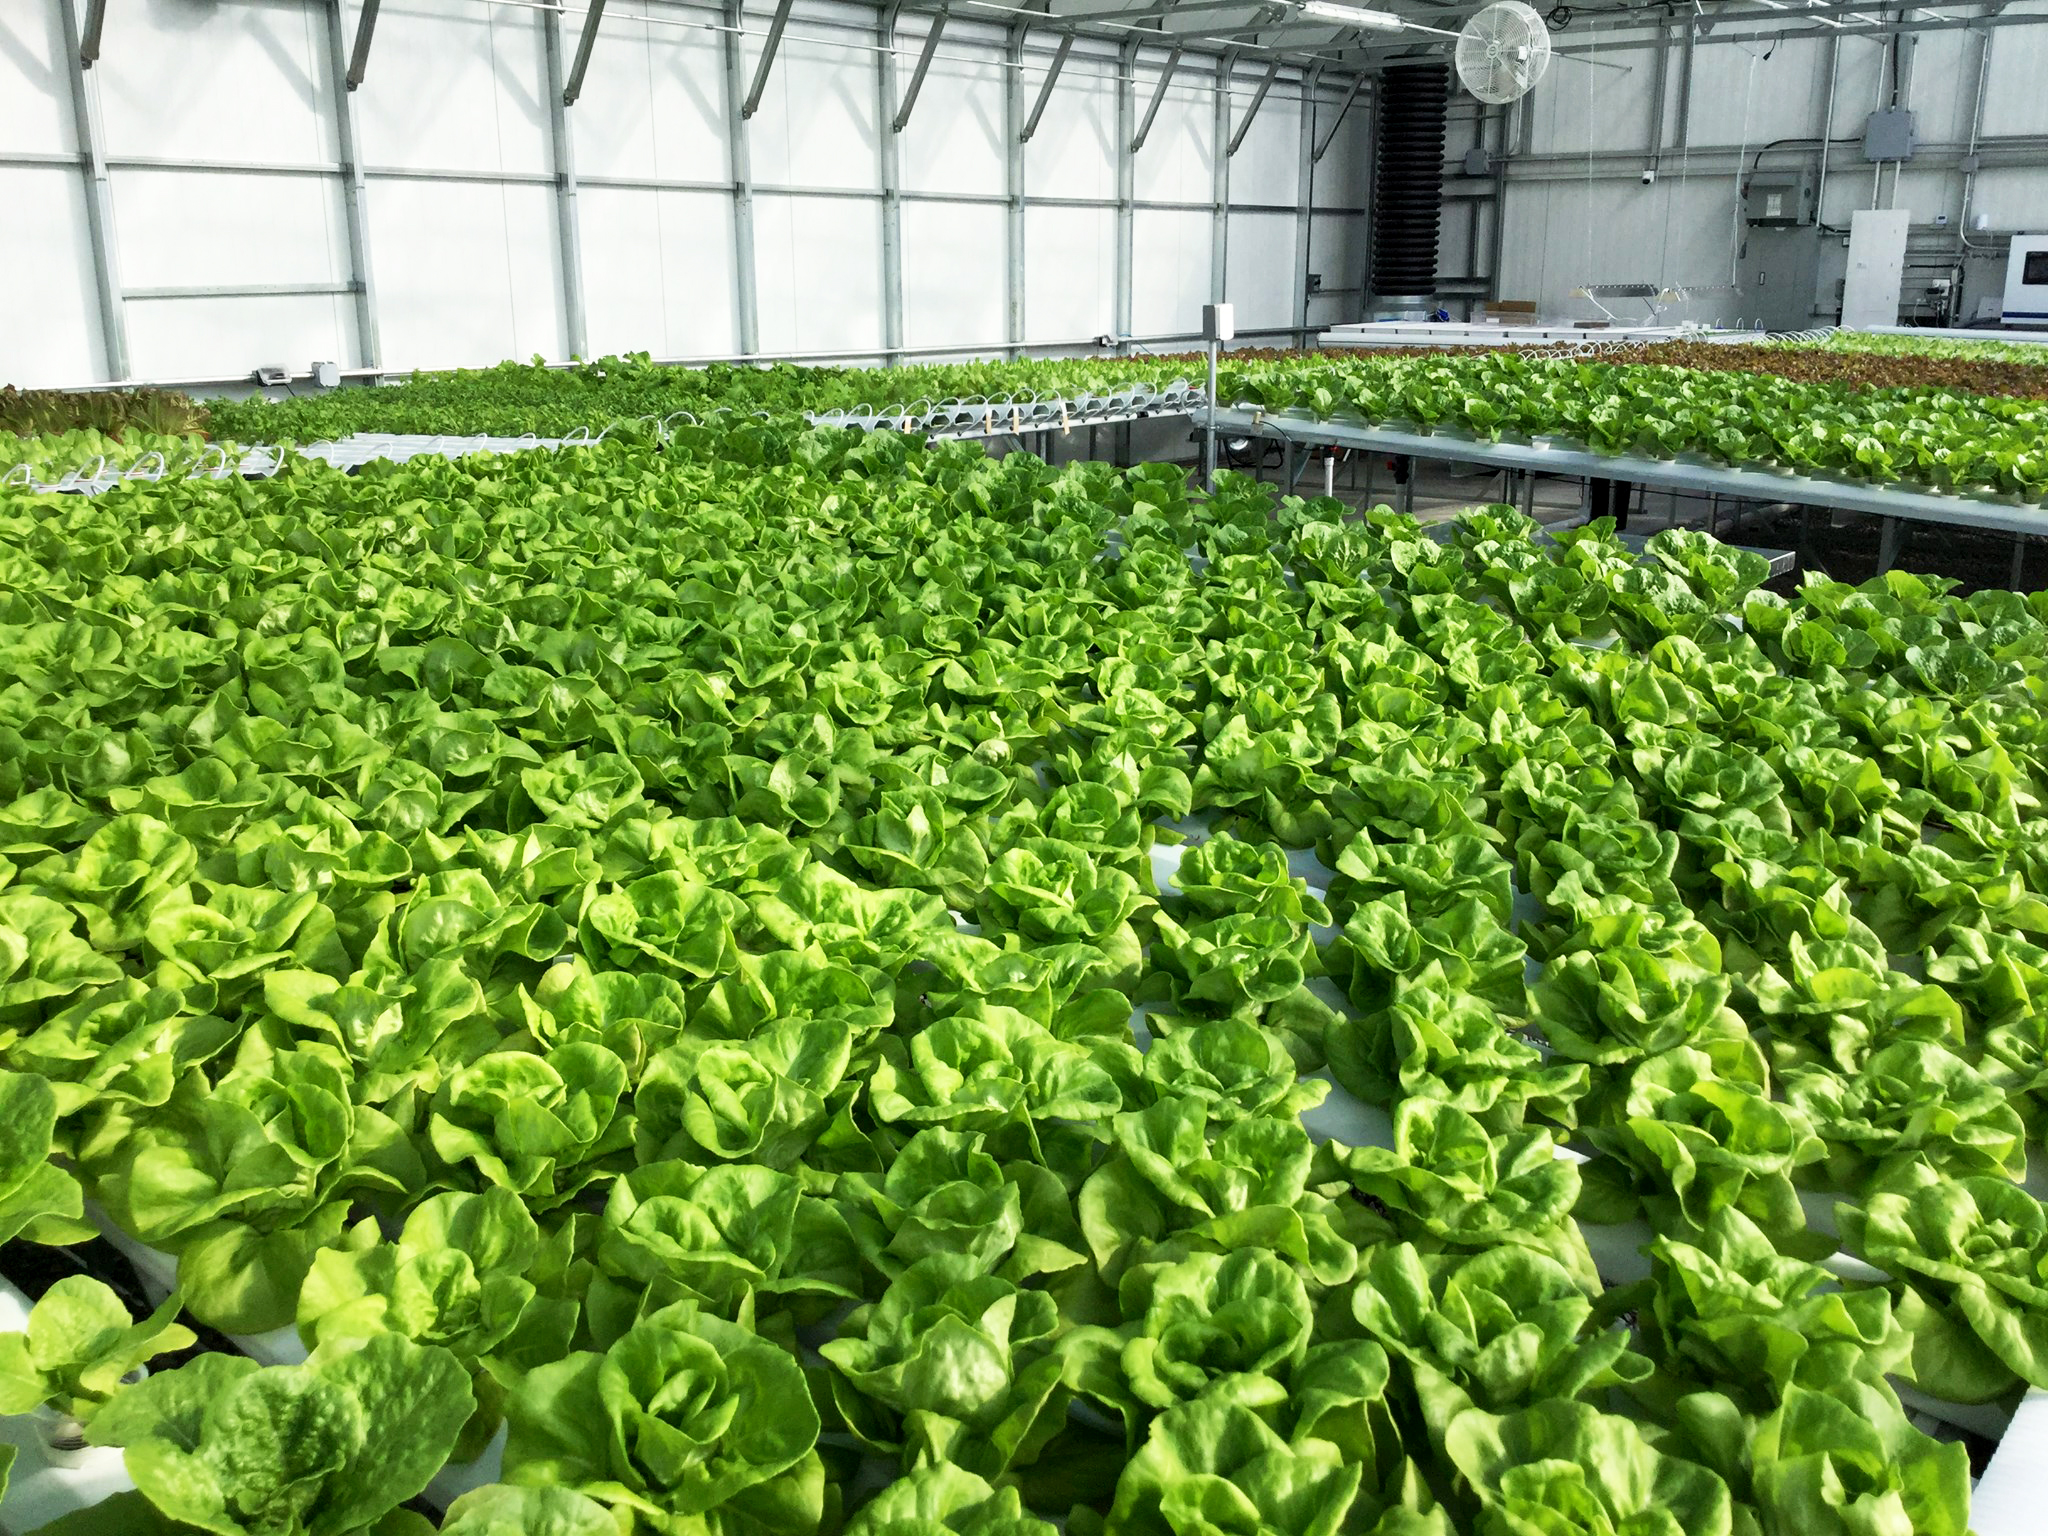 inside a commercial greenhouse